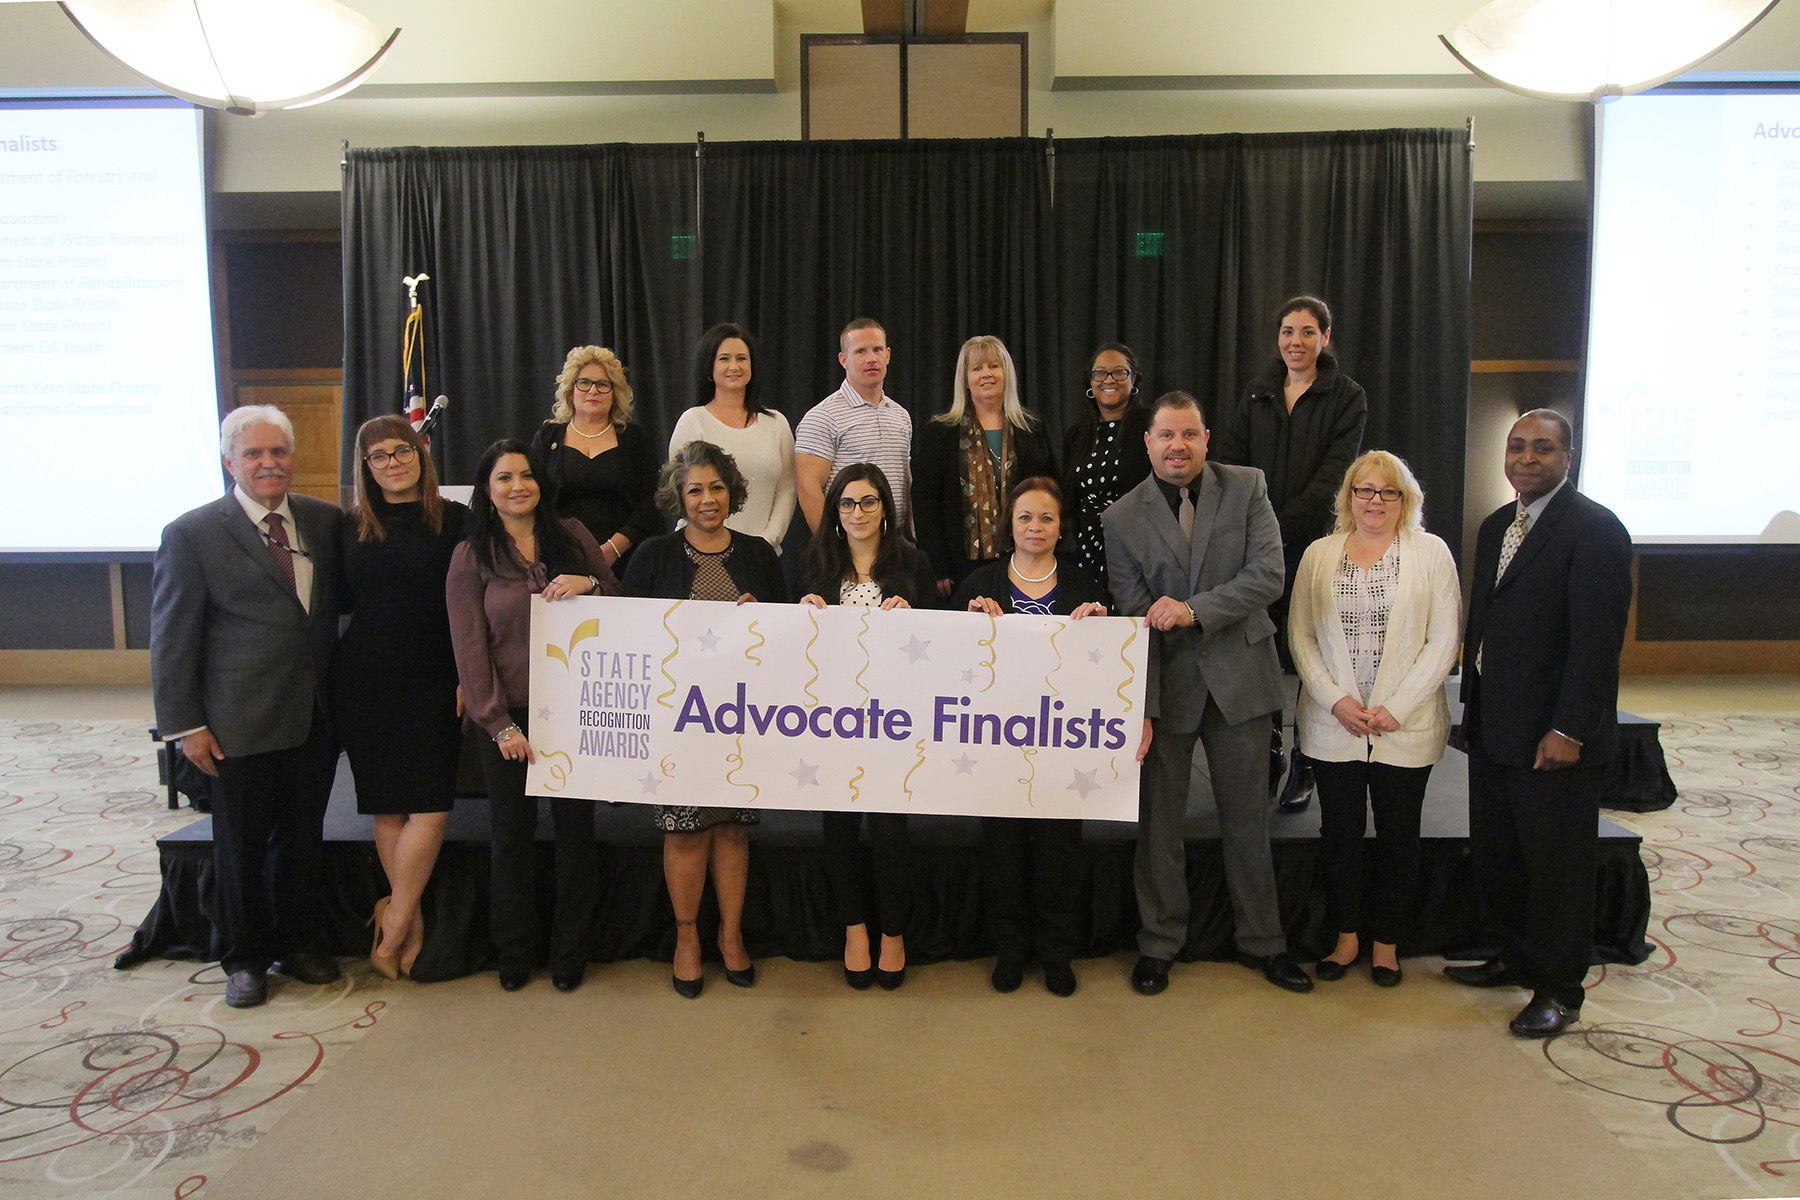 A photo of all the Advocate finalists